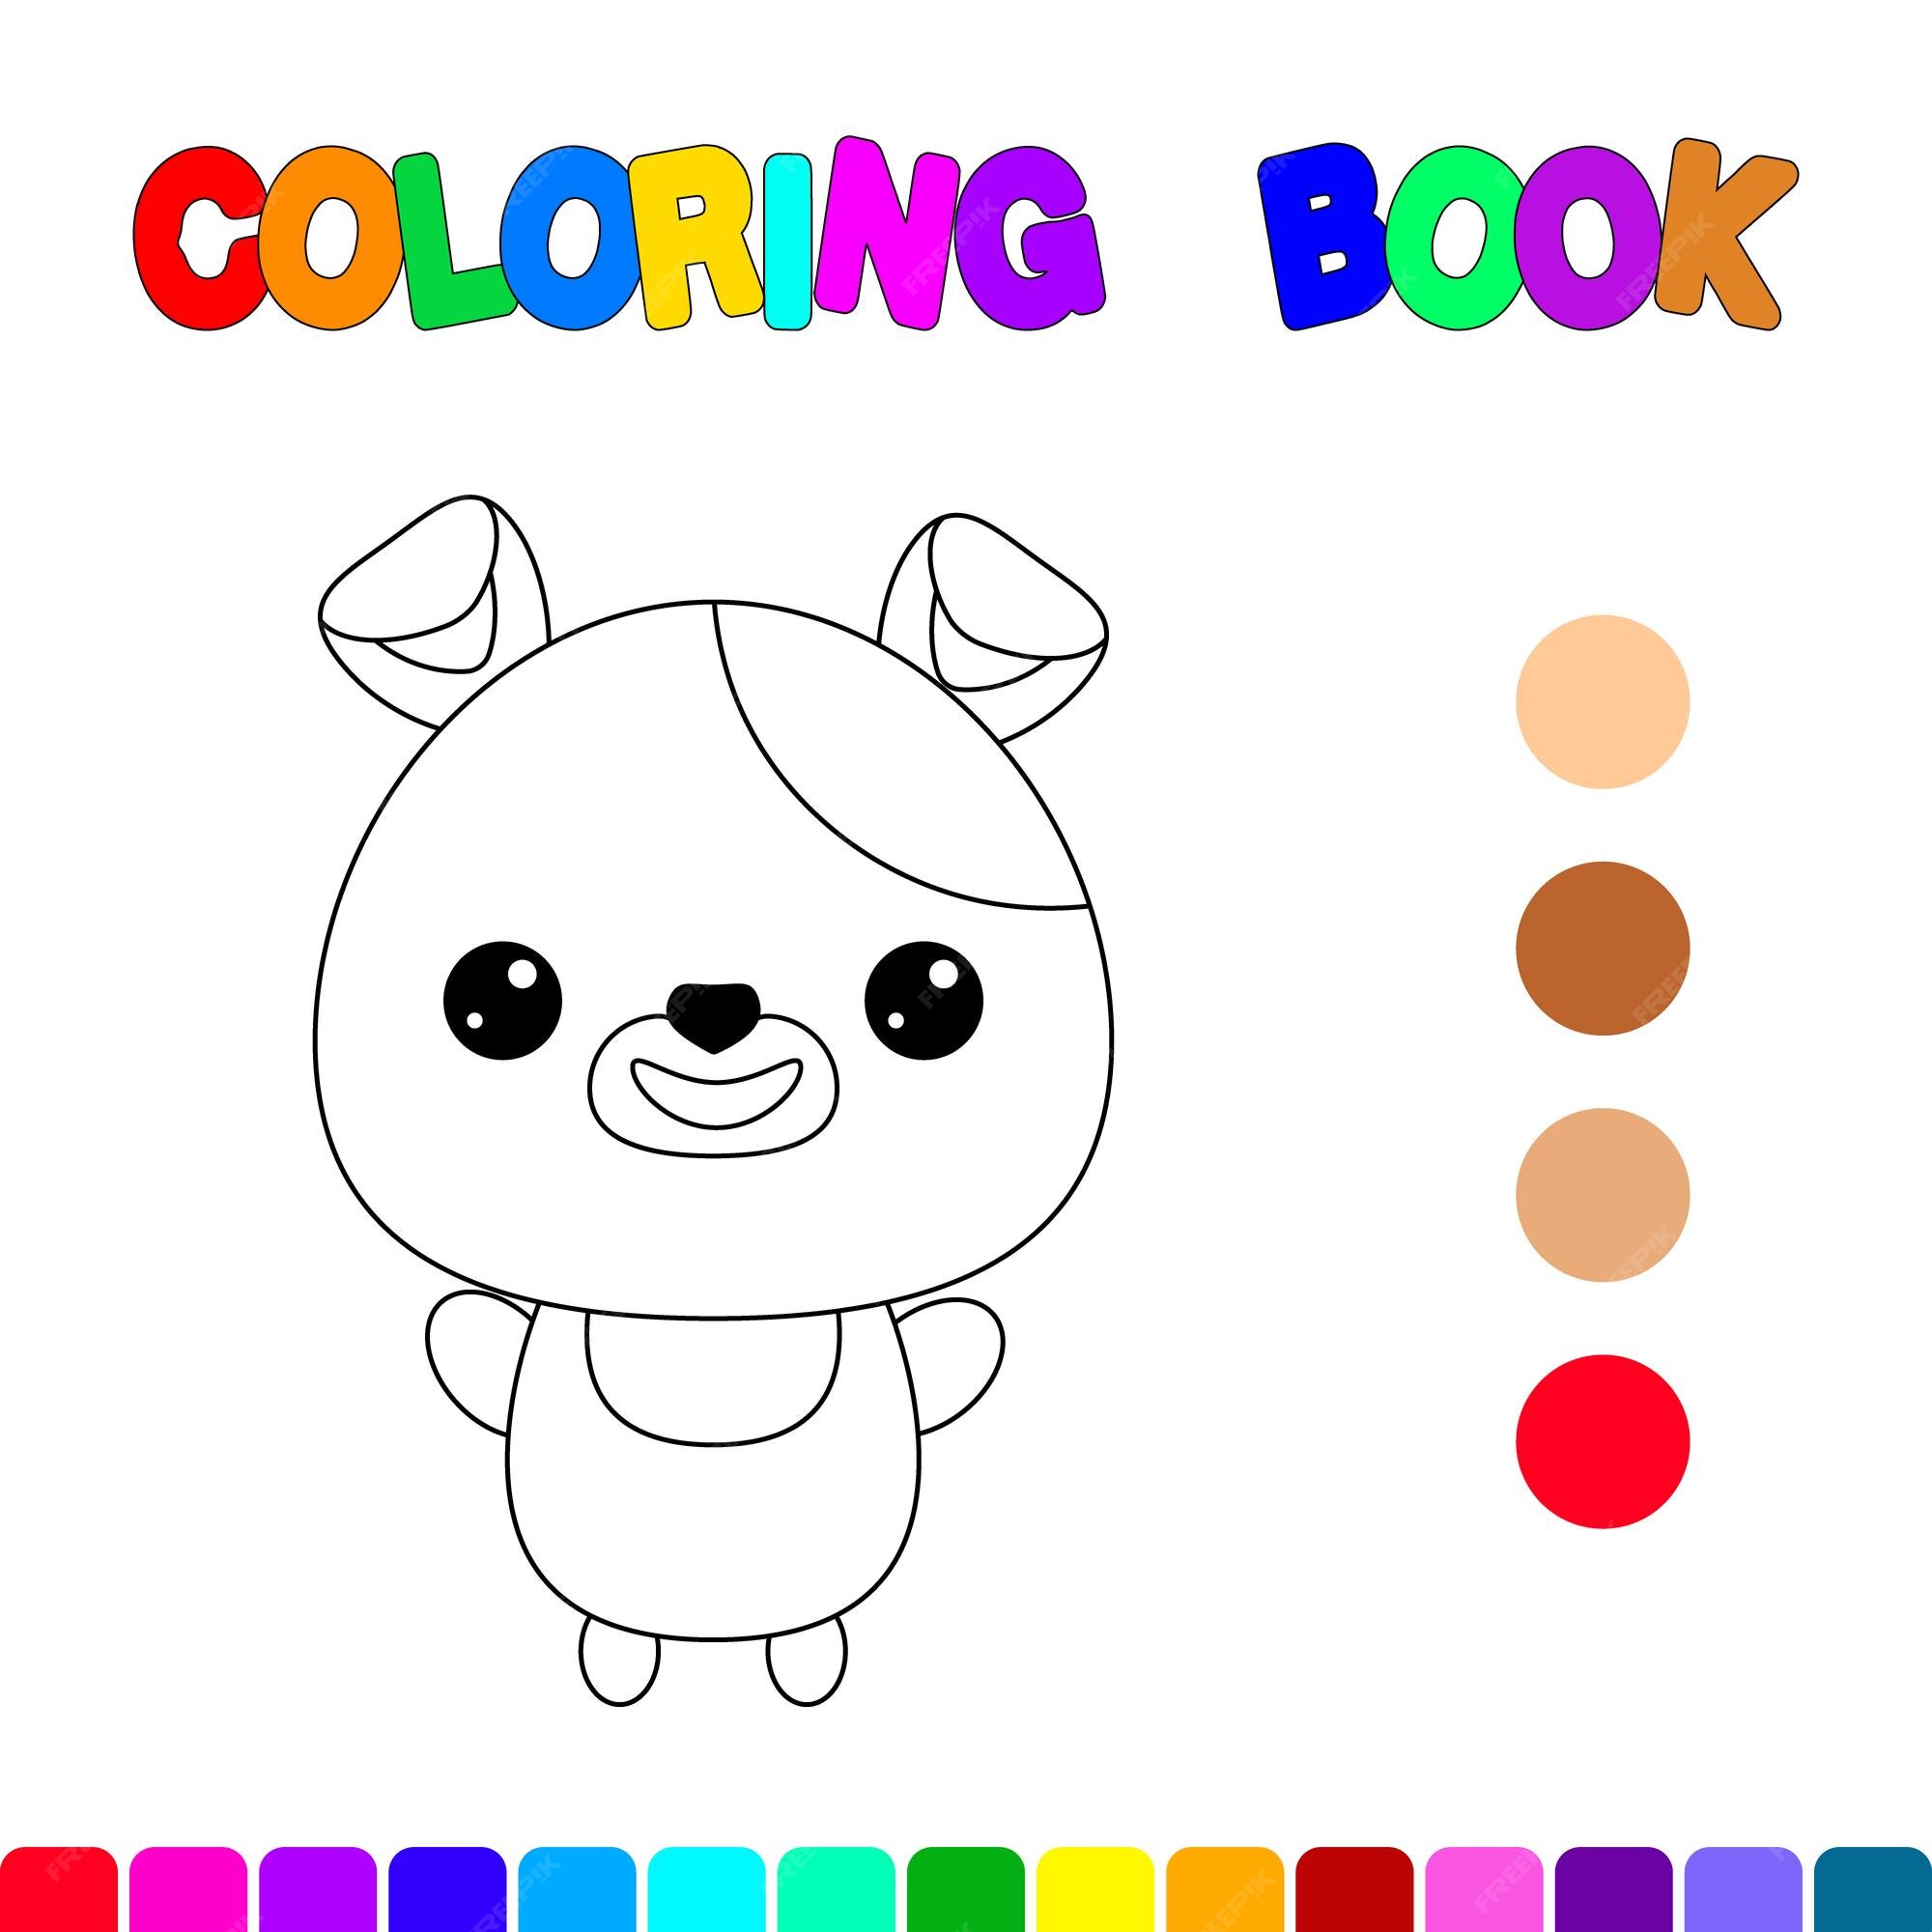 Premium vector coloring book with a dogcoloring page for kidseducational games for preschool children worksheet